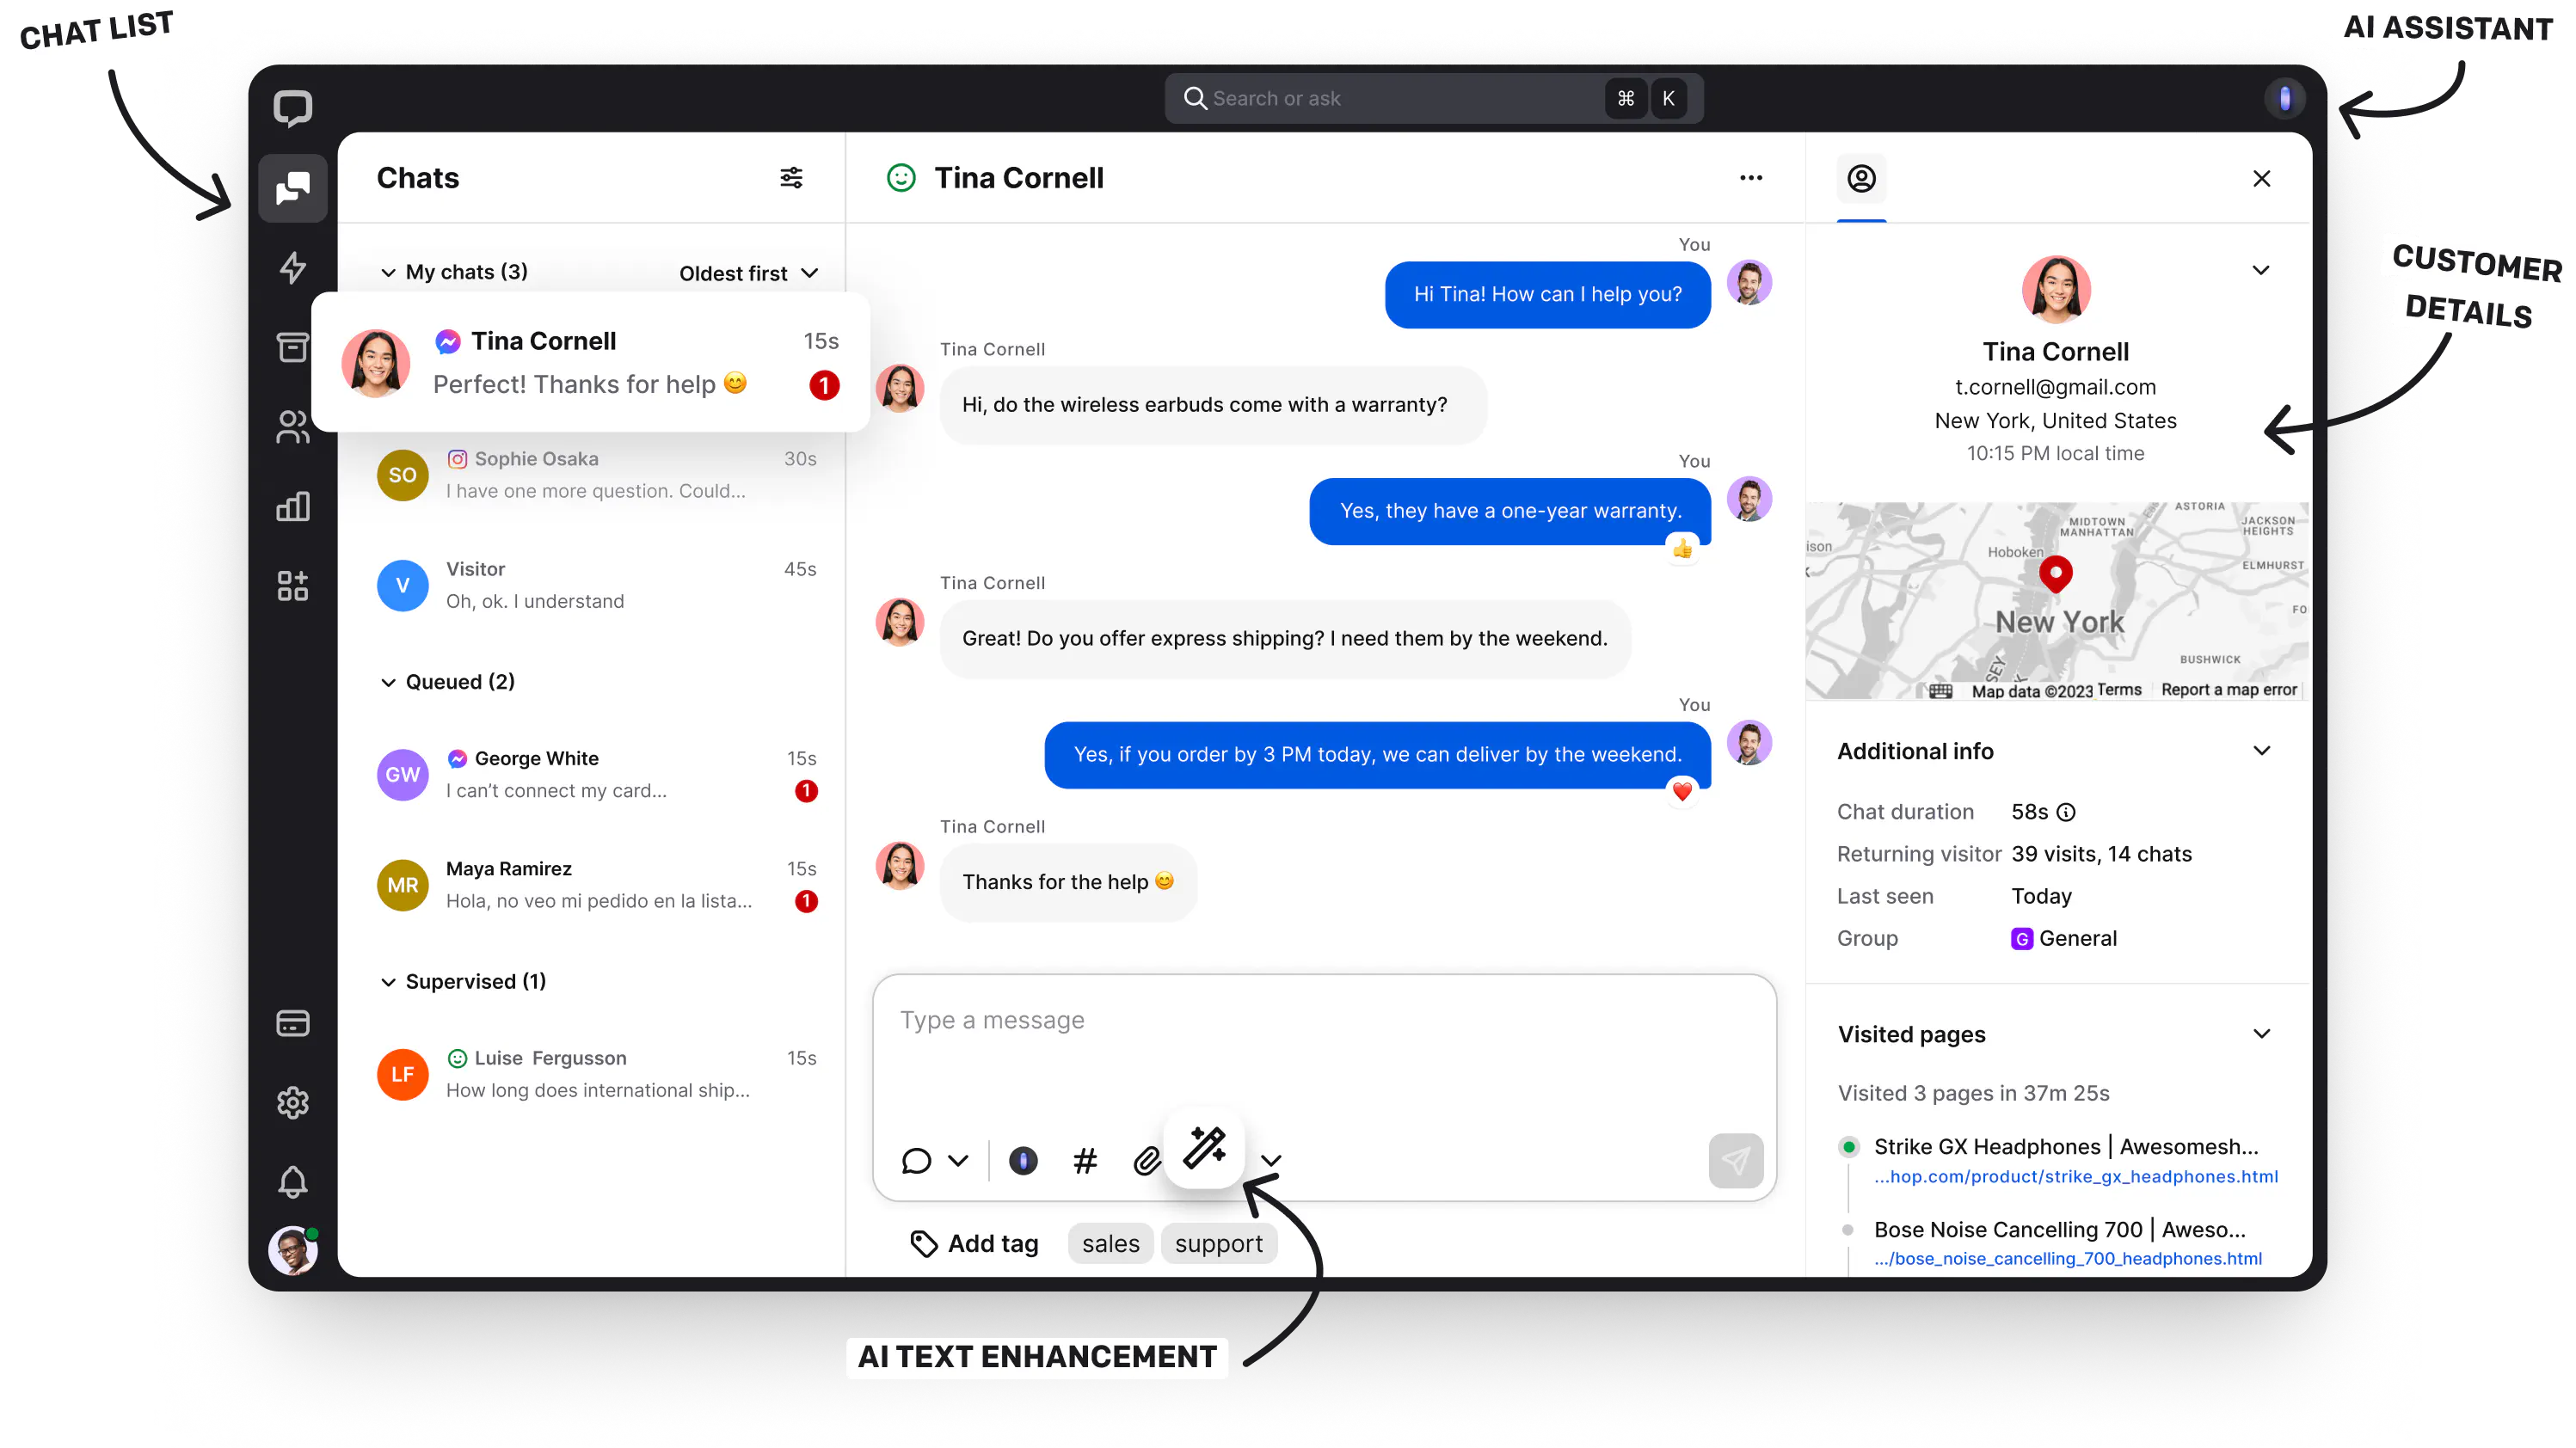 The look of the LiveChat app from the inside which shows the chat list and its features: AI text enhancement, Customer Details, and AI Assistant.